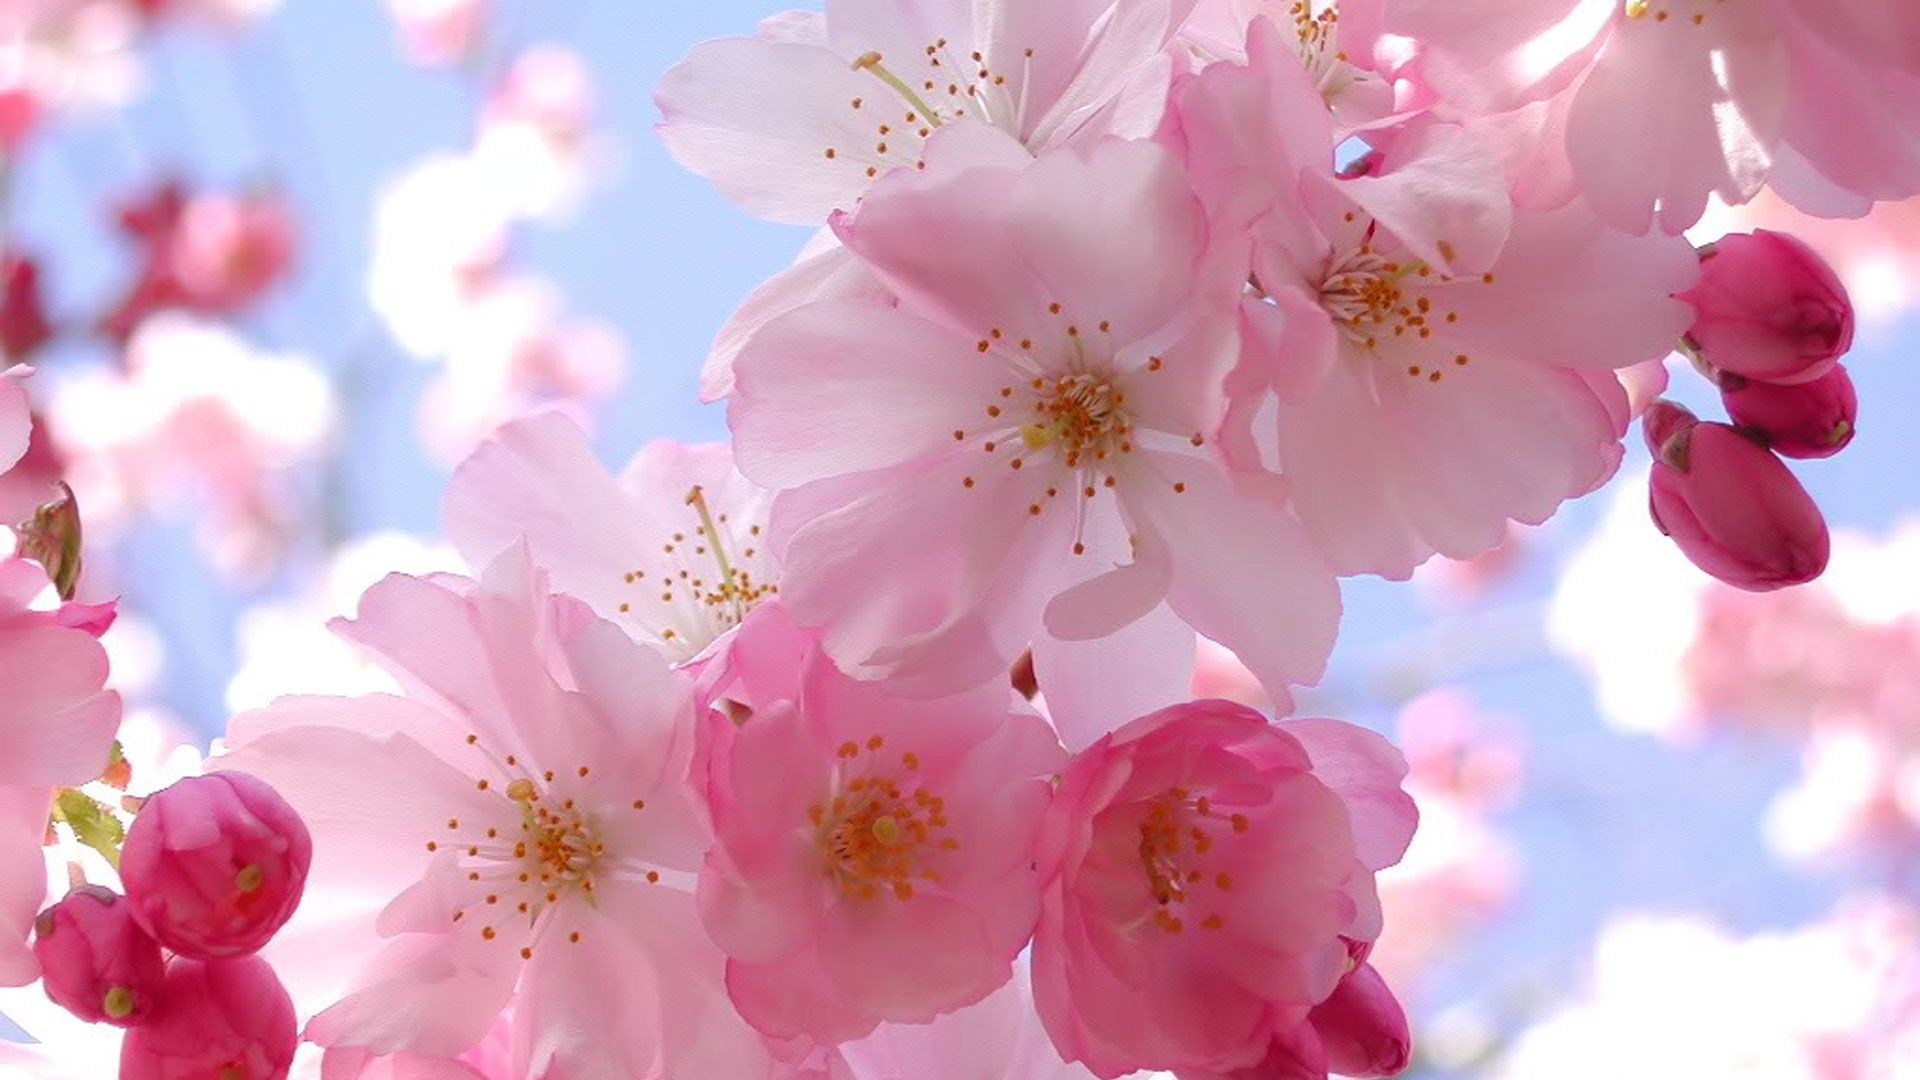 Blooming Pink Cherry Blossom - Japanese Cherry Blossom Hd - 1920x1080  Wallpaper 